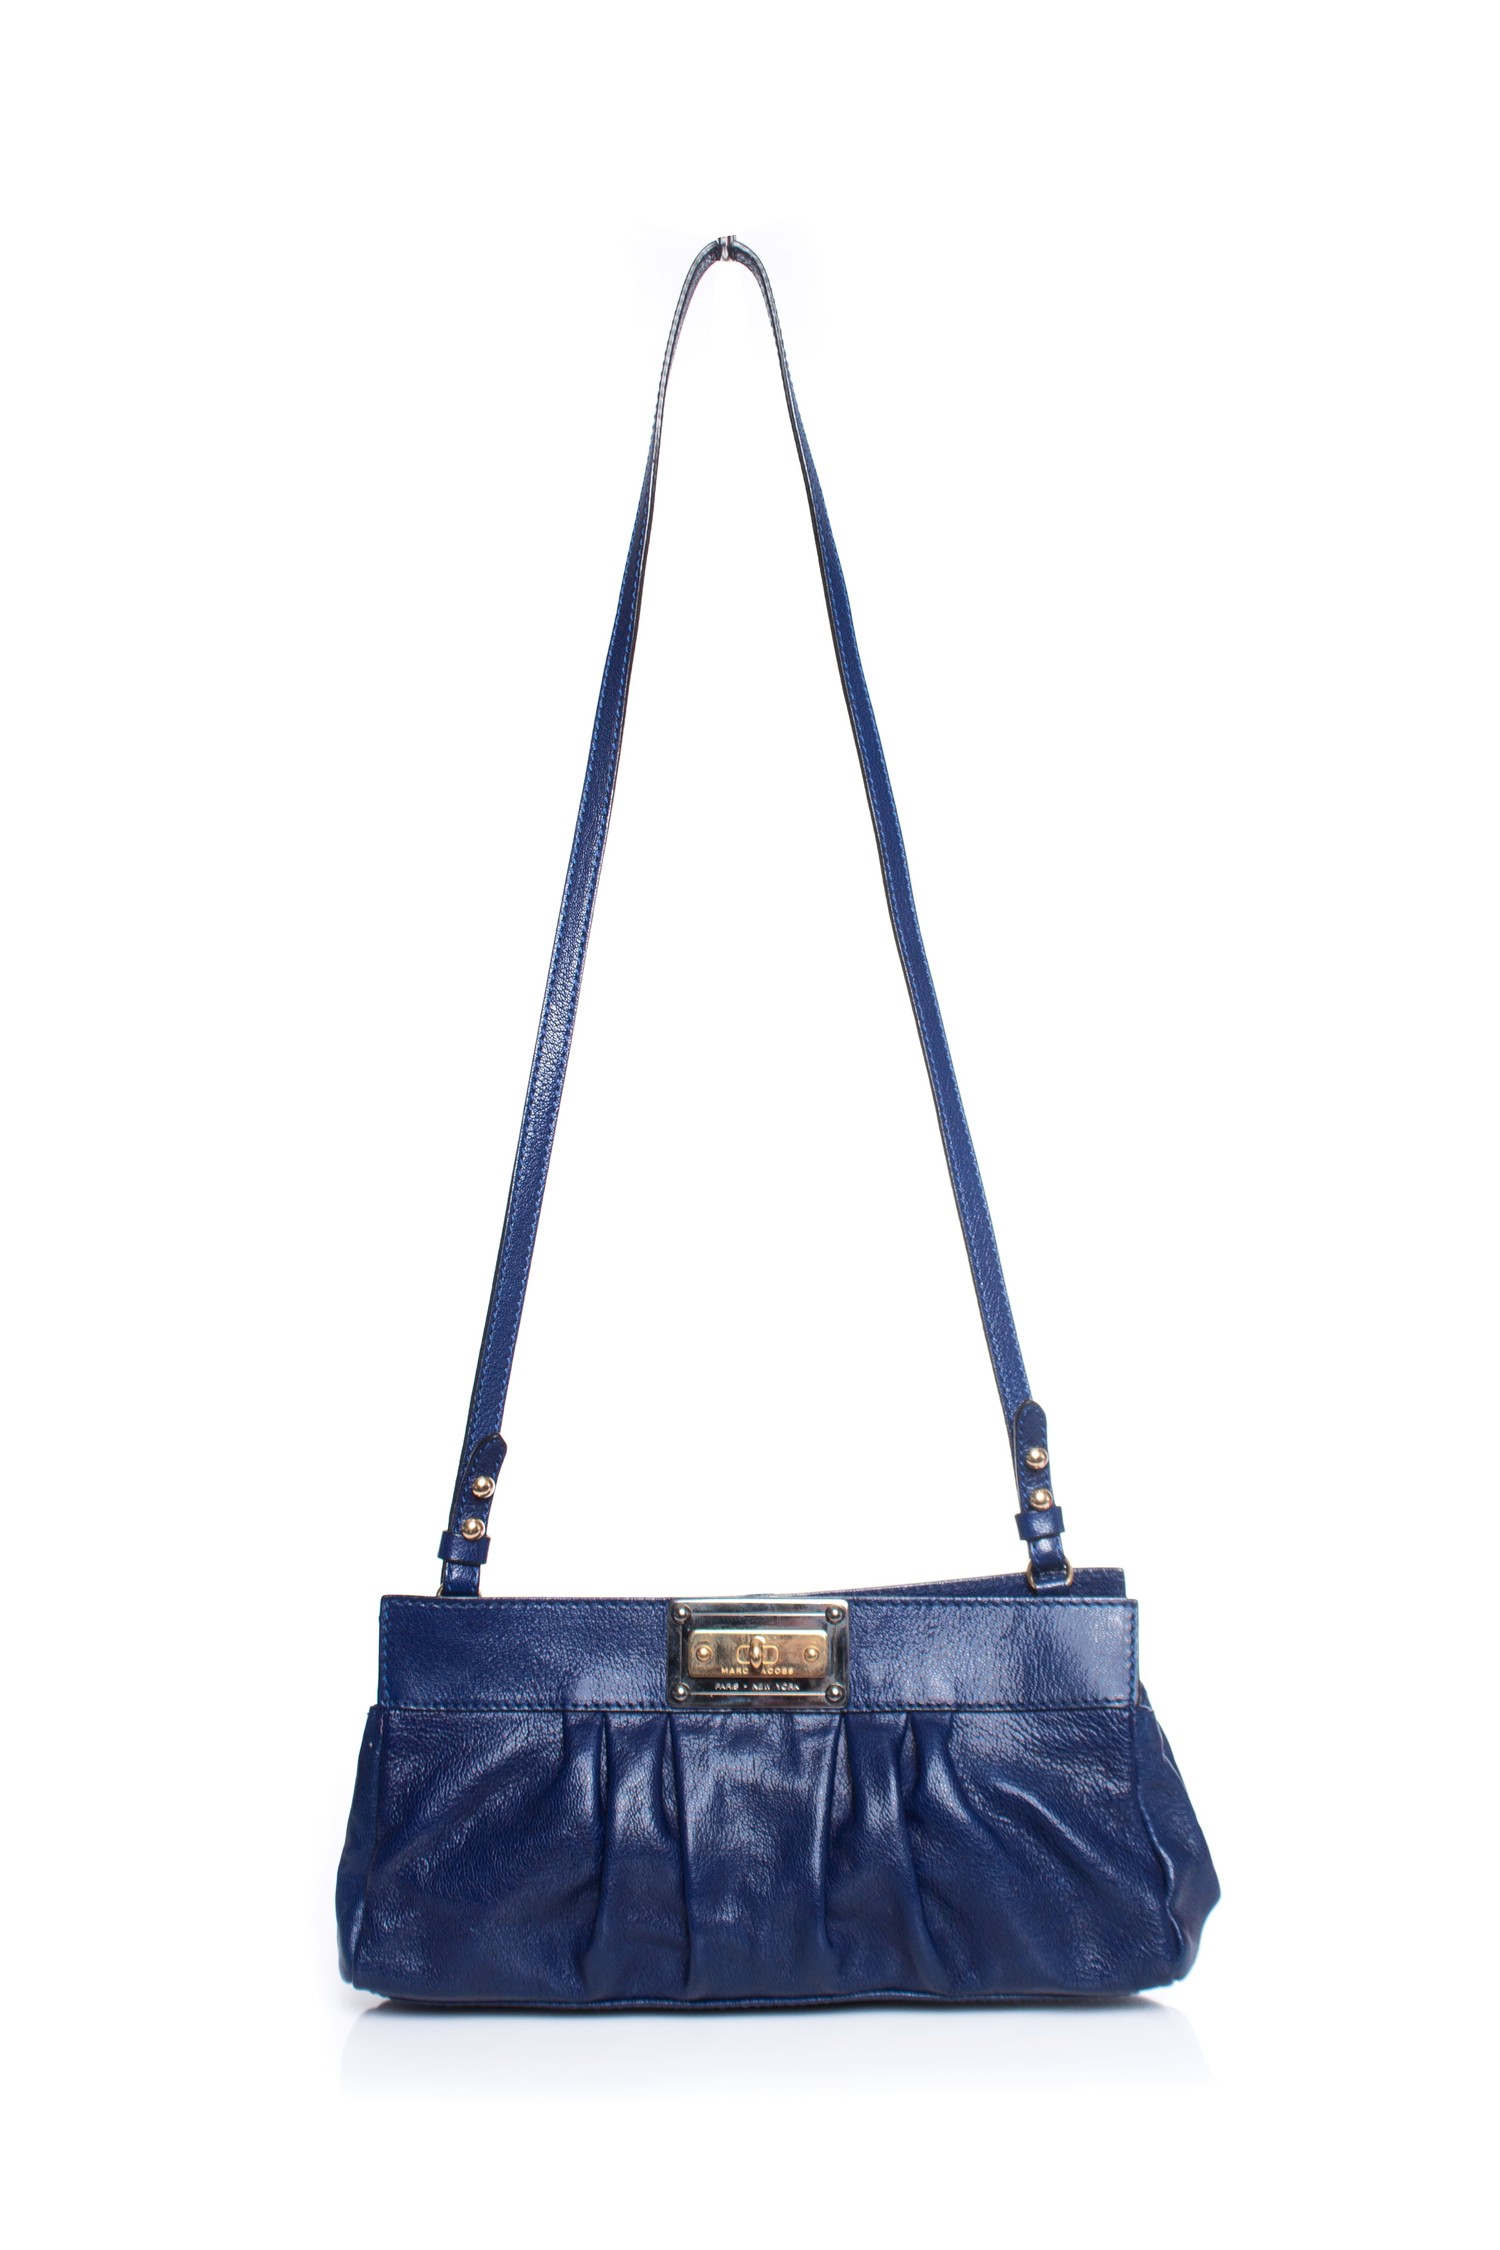 House of Dereon Blue Leather Purse  Blue leather purse, Marc jacobs  leather bag, Ostrich leather